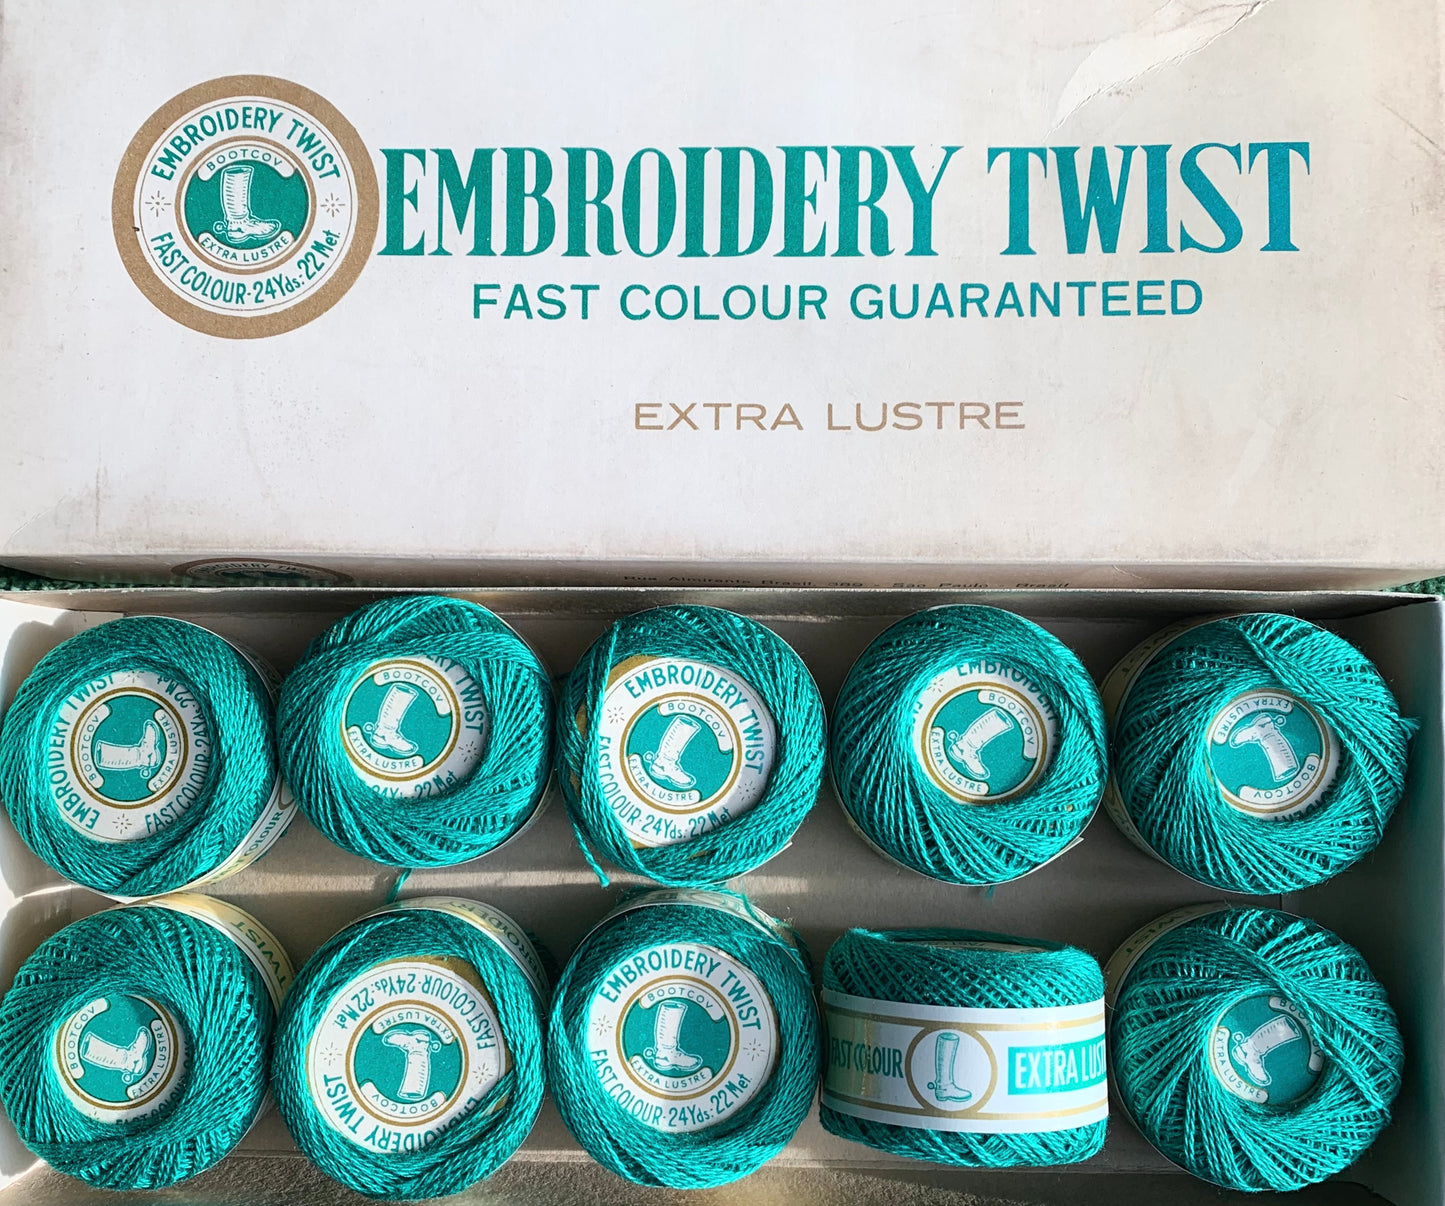 Vintage Green Extra Lustre Cotton Embroidery or Darning Thread 10 balls x 22m (32)